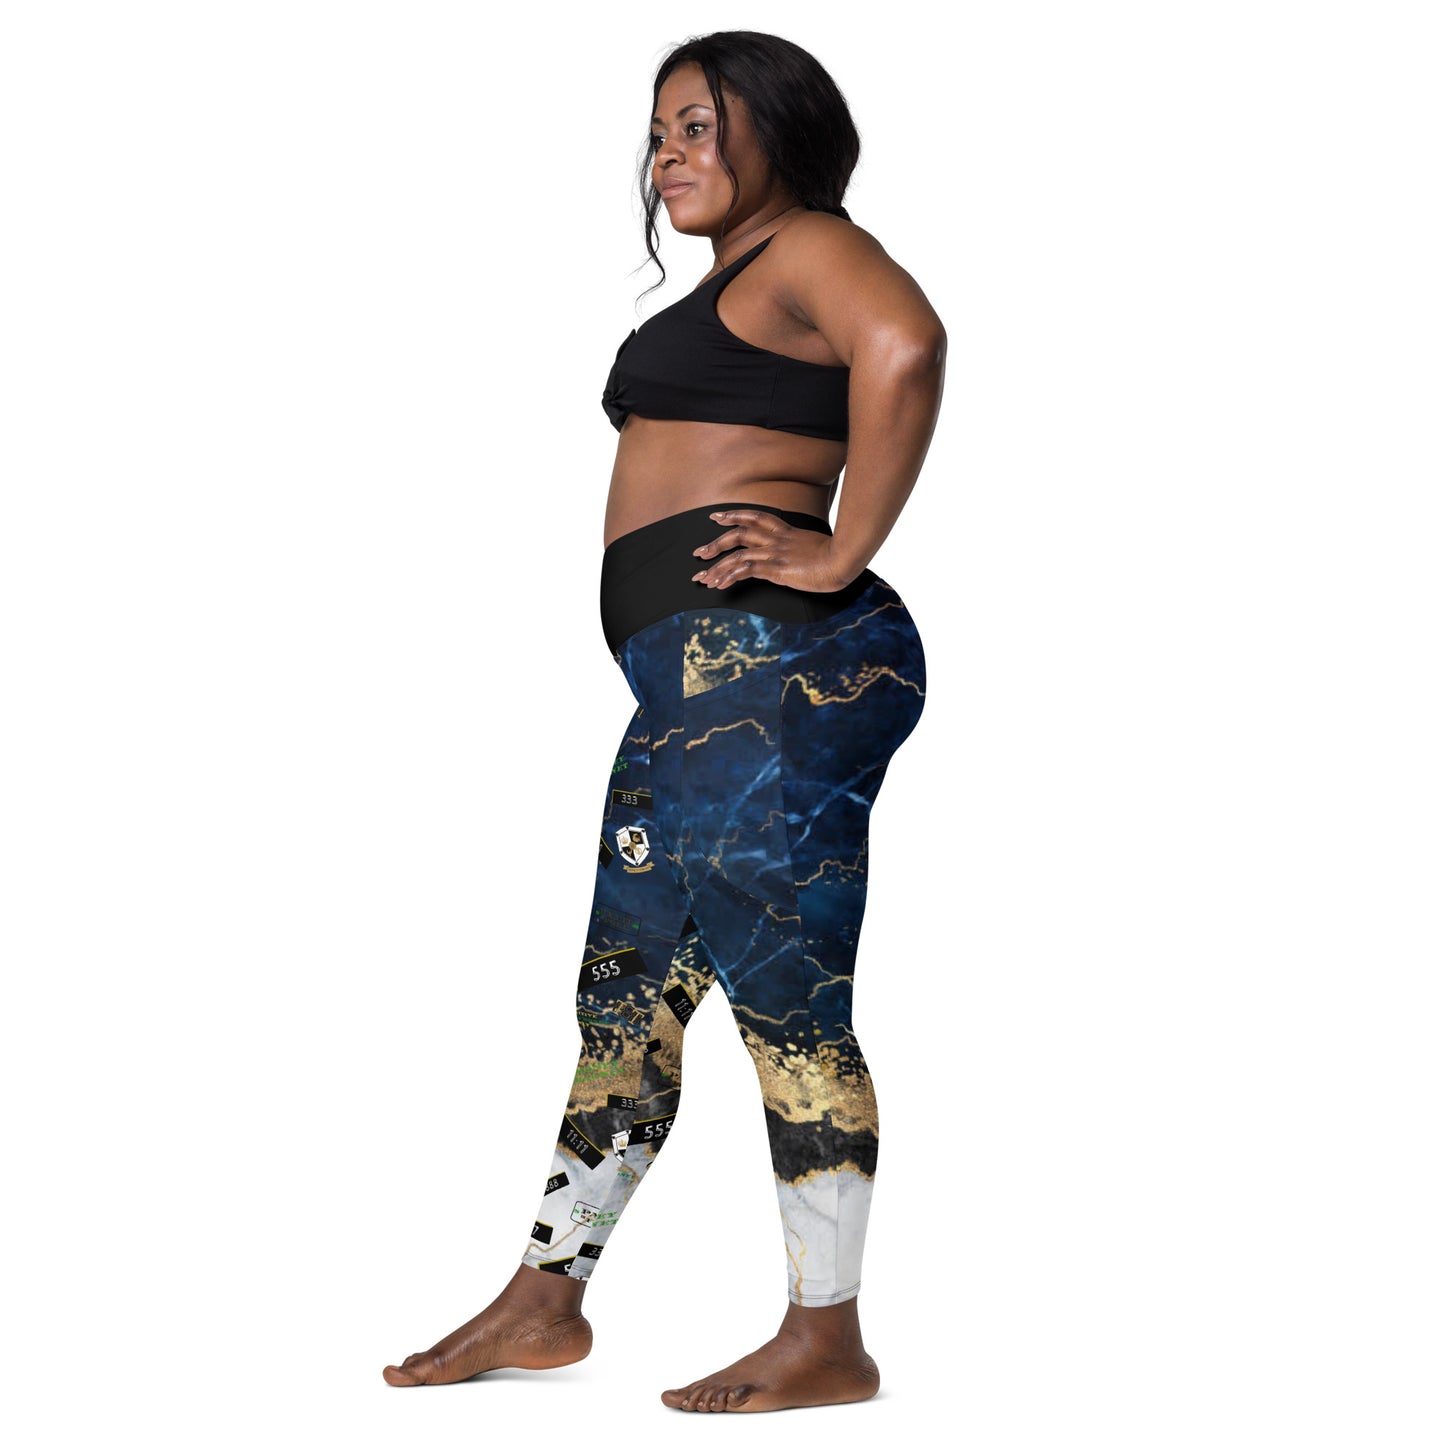 8xquiZit Collection - Women's Manifestation Tri-color Blue, Gold, & White Marble Crossover Leggings with Pockets